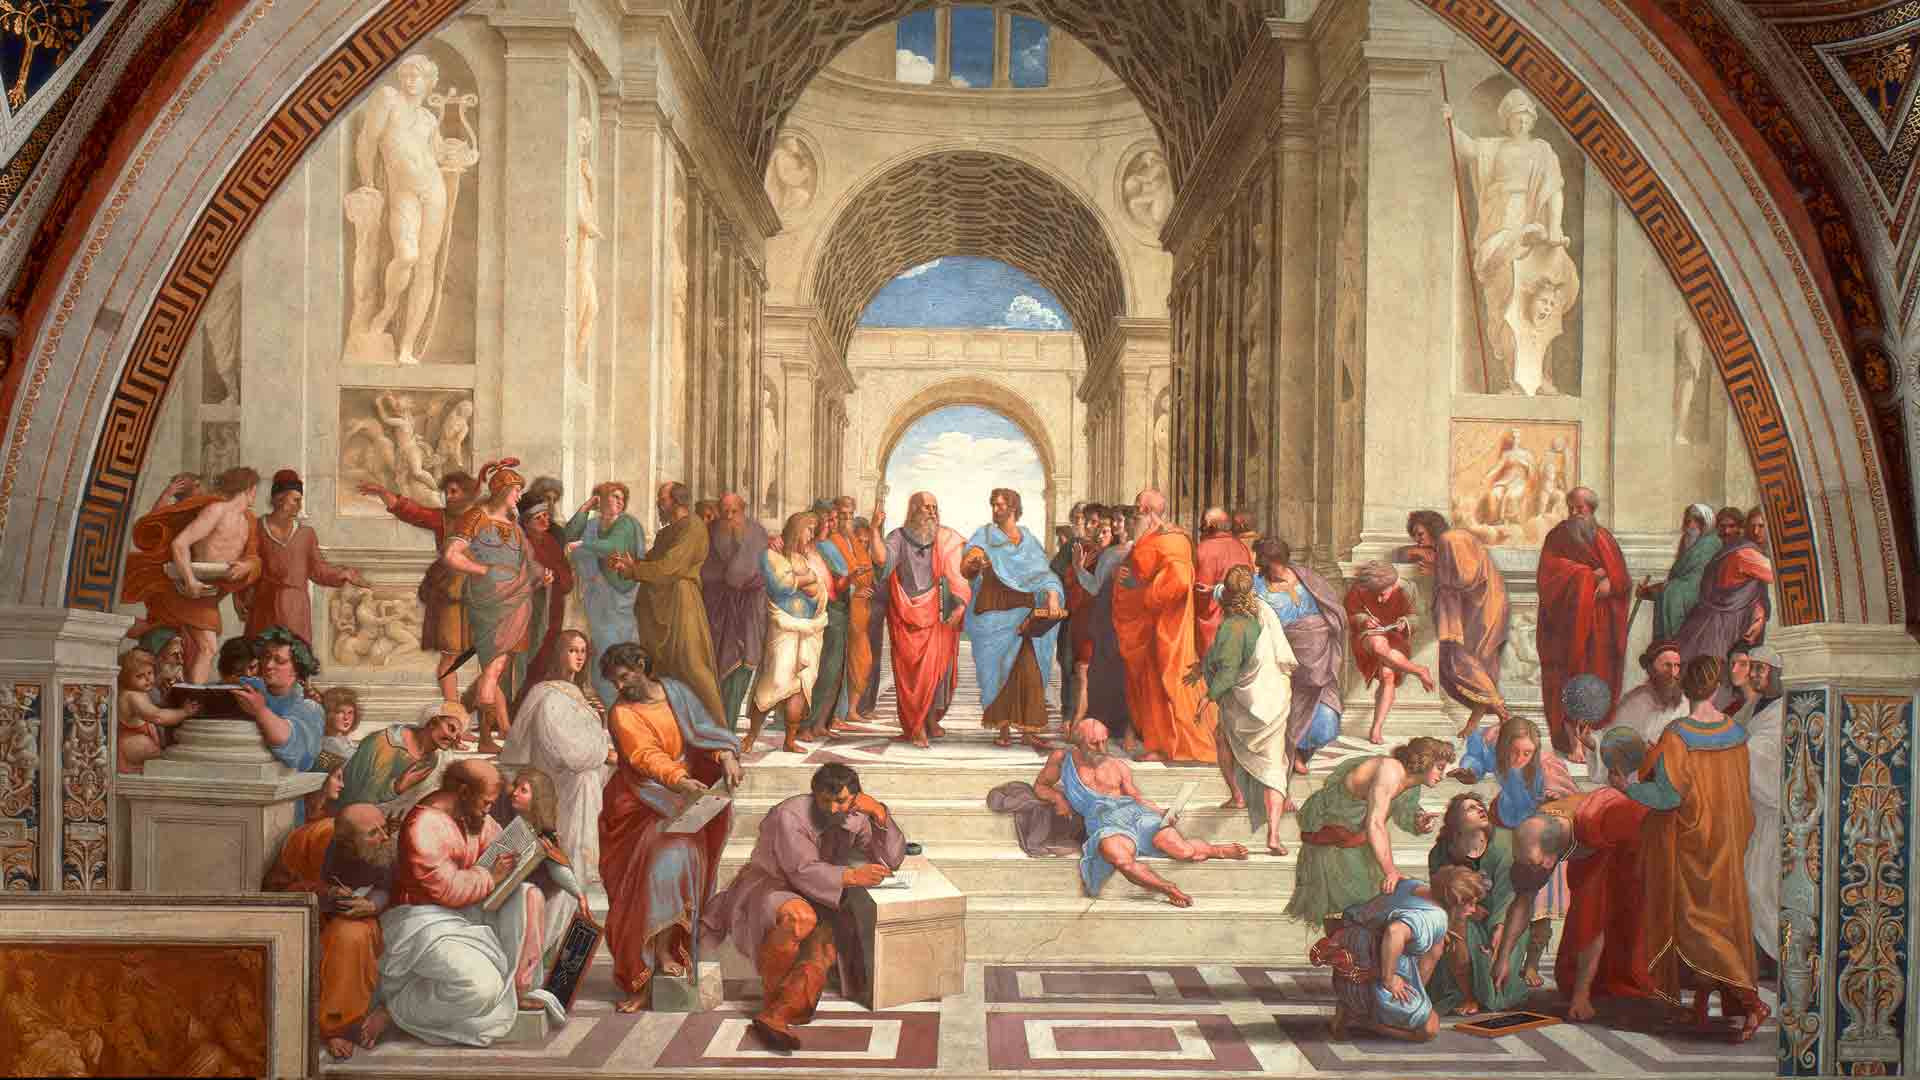 The School of Athens, Rome, Italy (CC0 1.0)